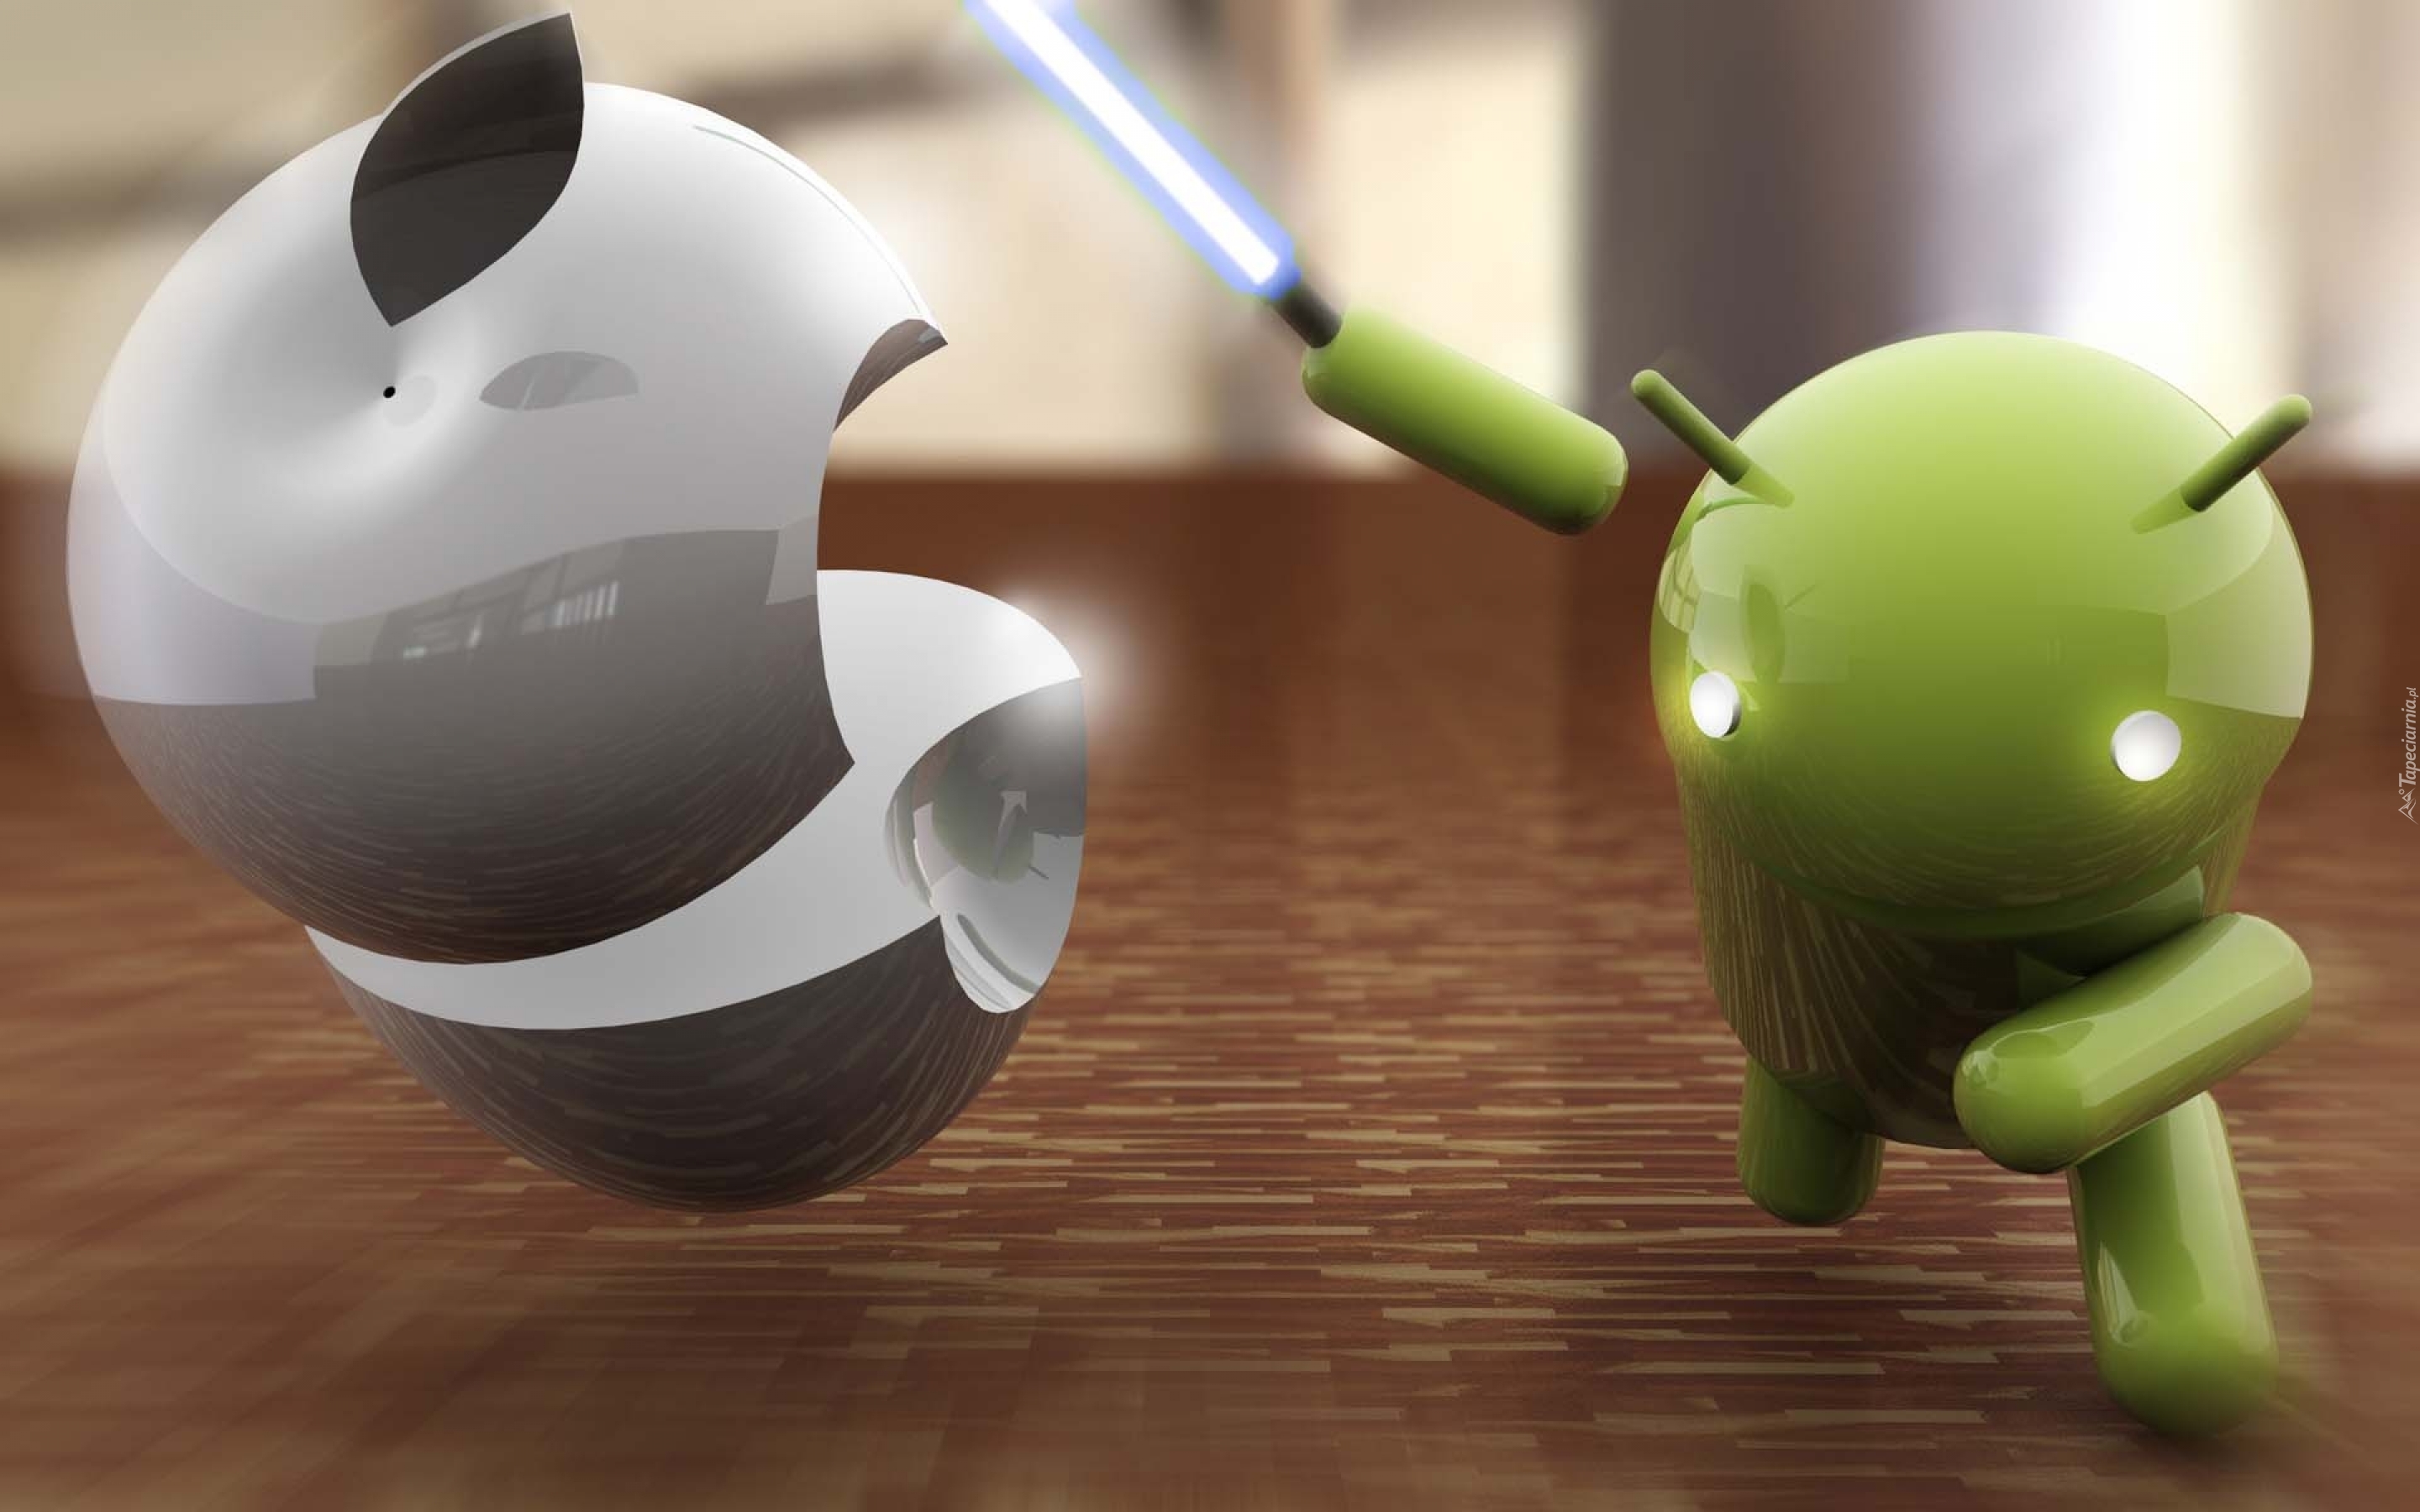 Android, Miecz, Apple